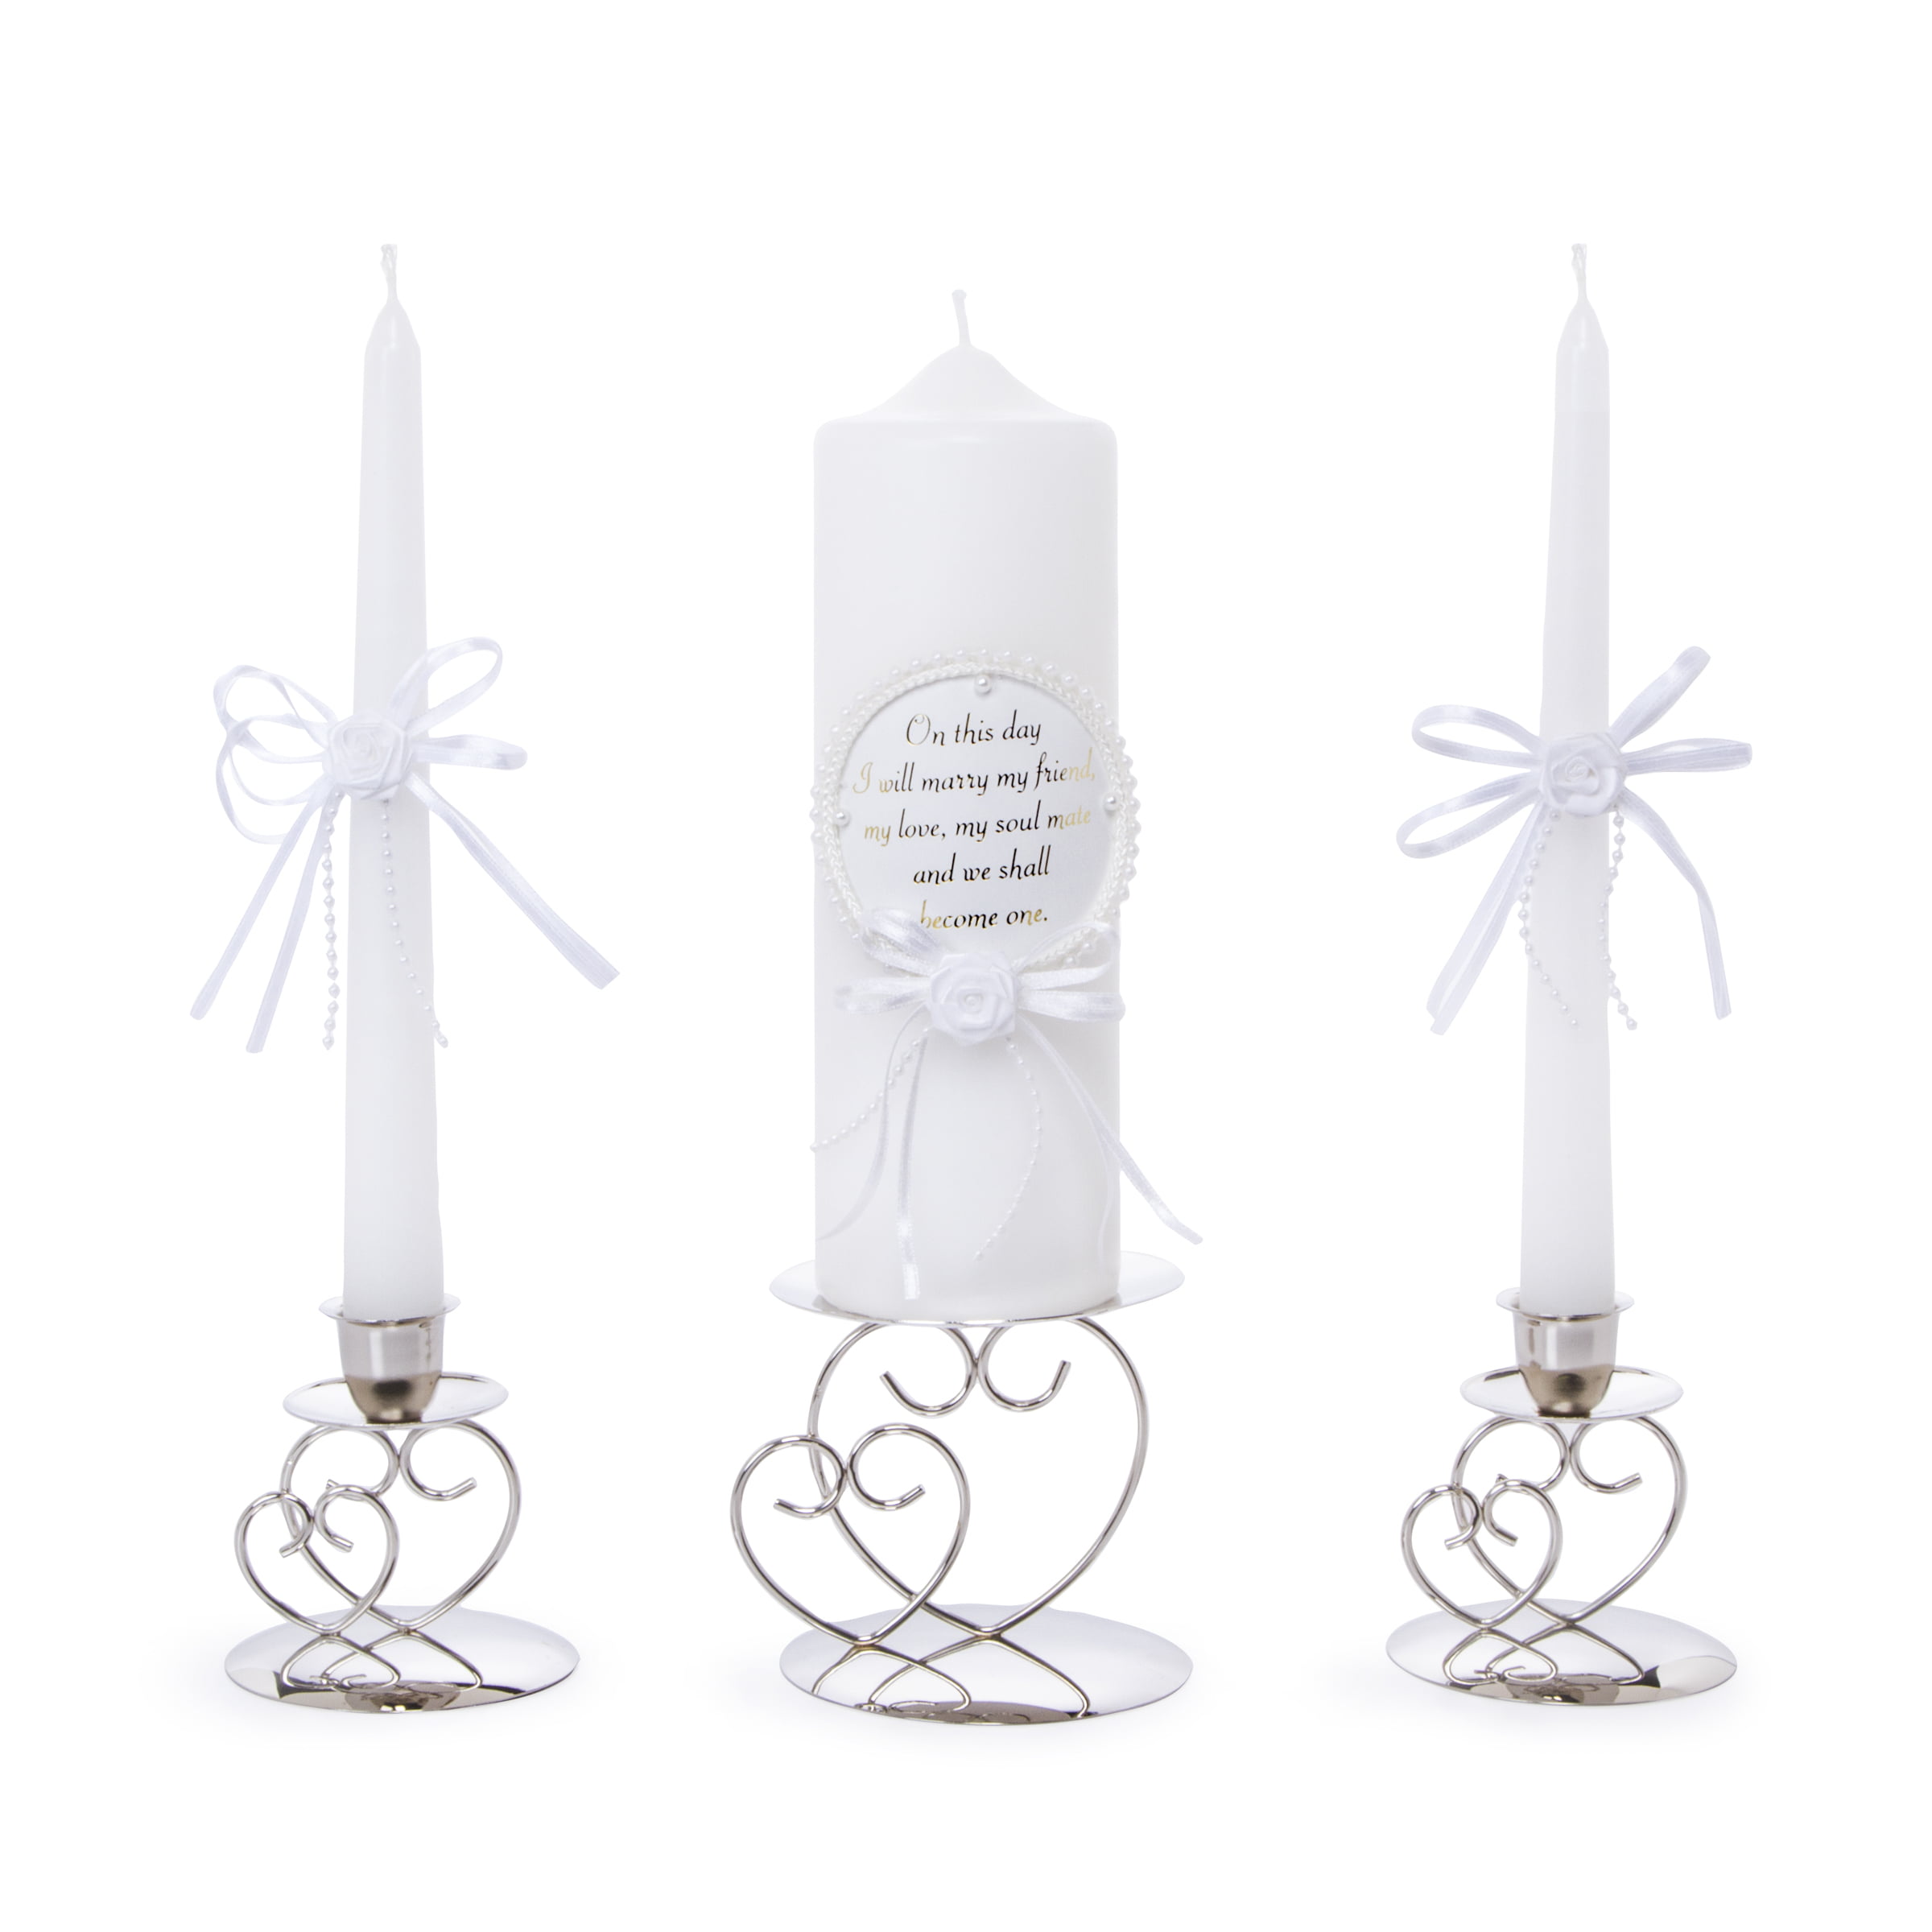 Victoria Lynn Wedding Bridal Silver Unity Double Heart Candle Holder Set of 3 